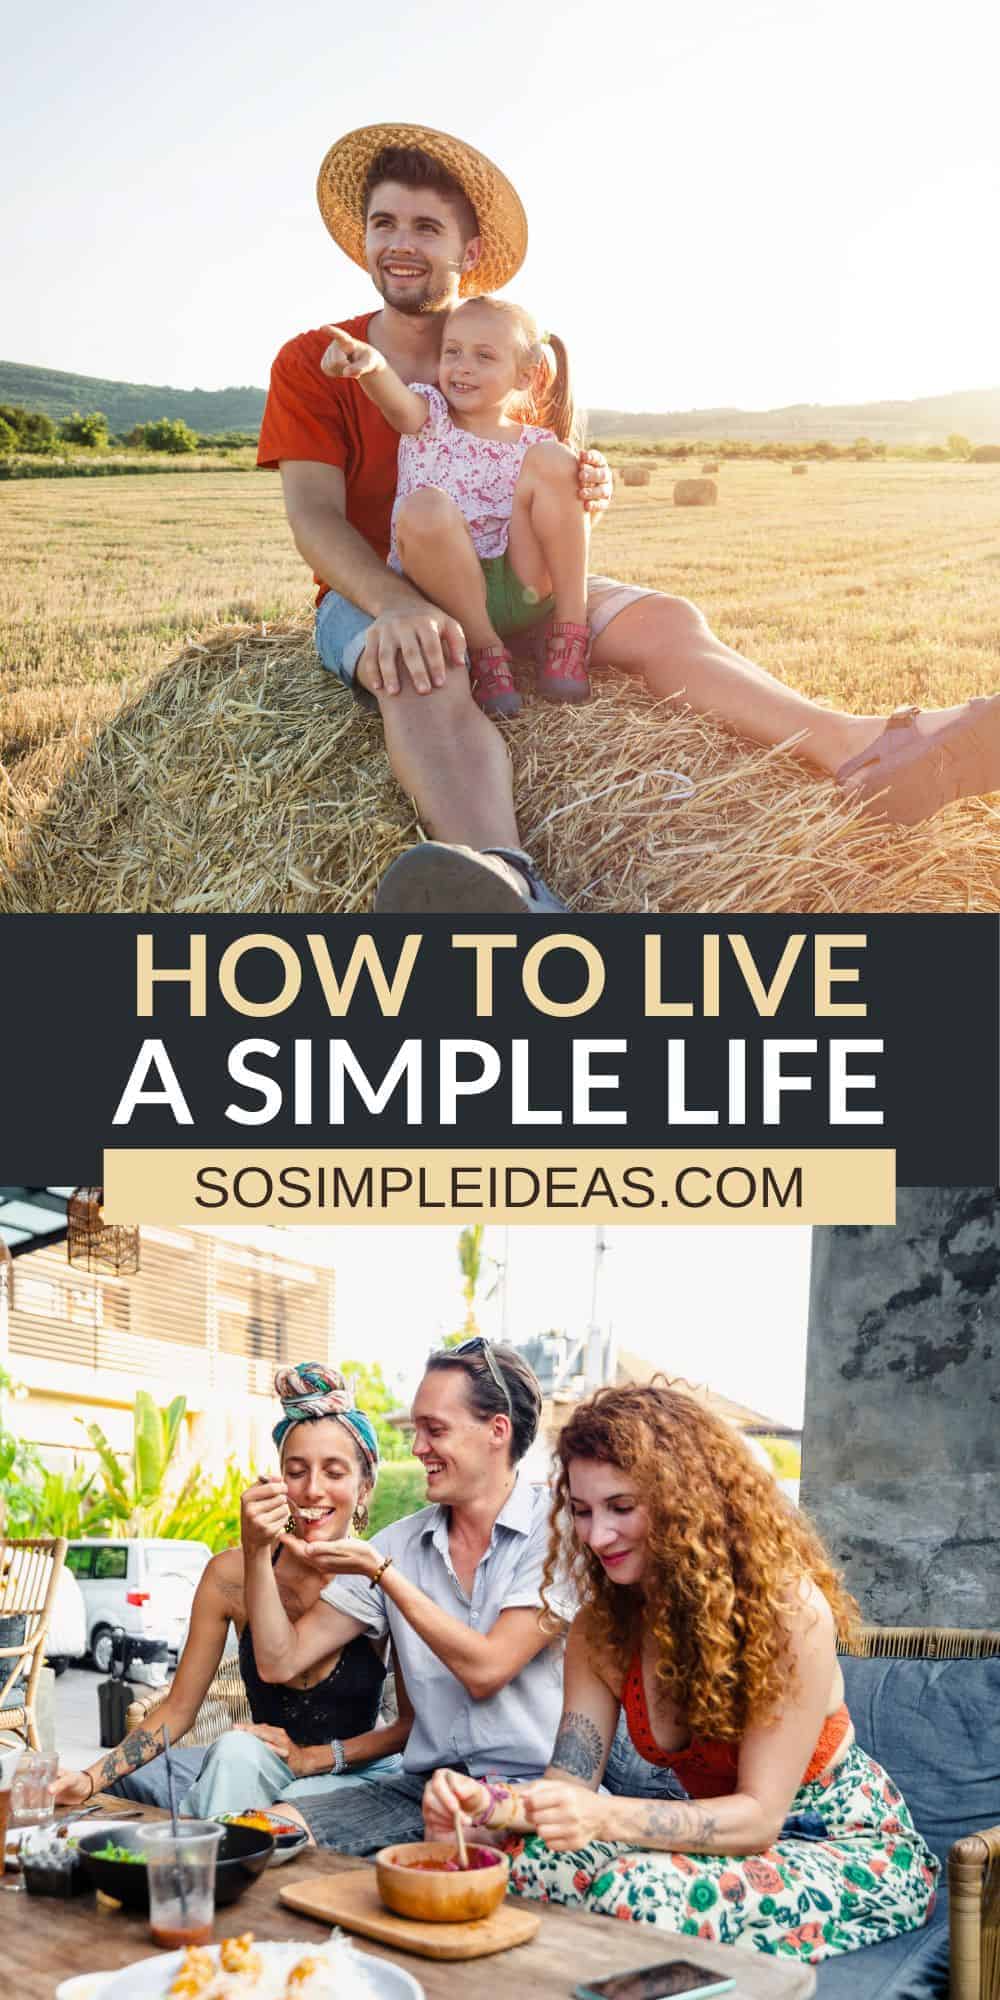 how to live a simple life pinterest image.